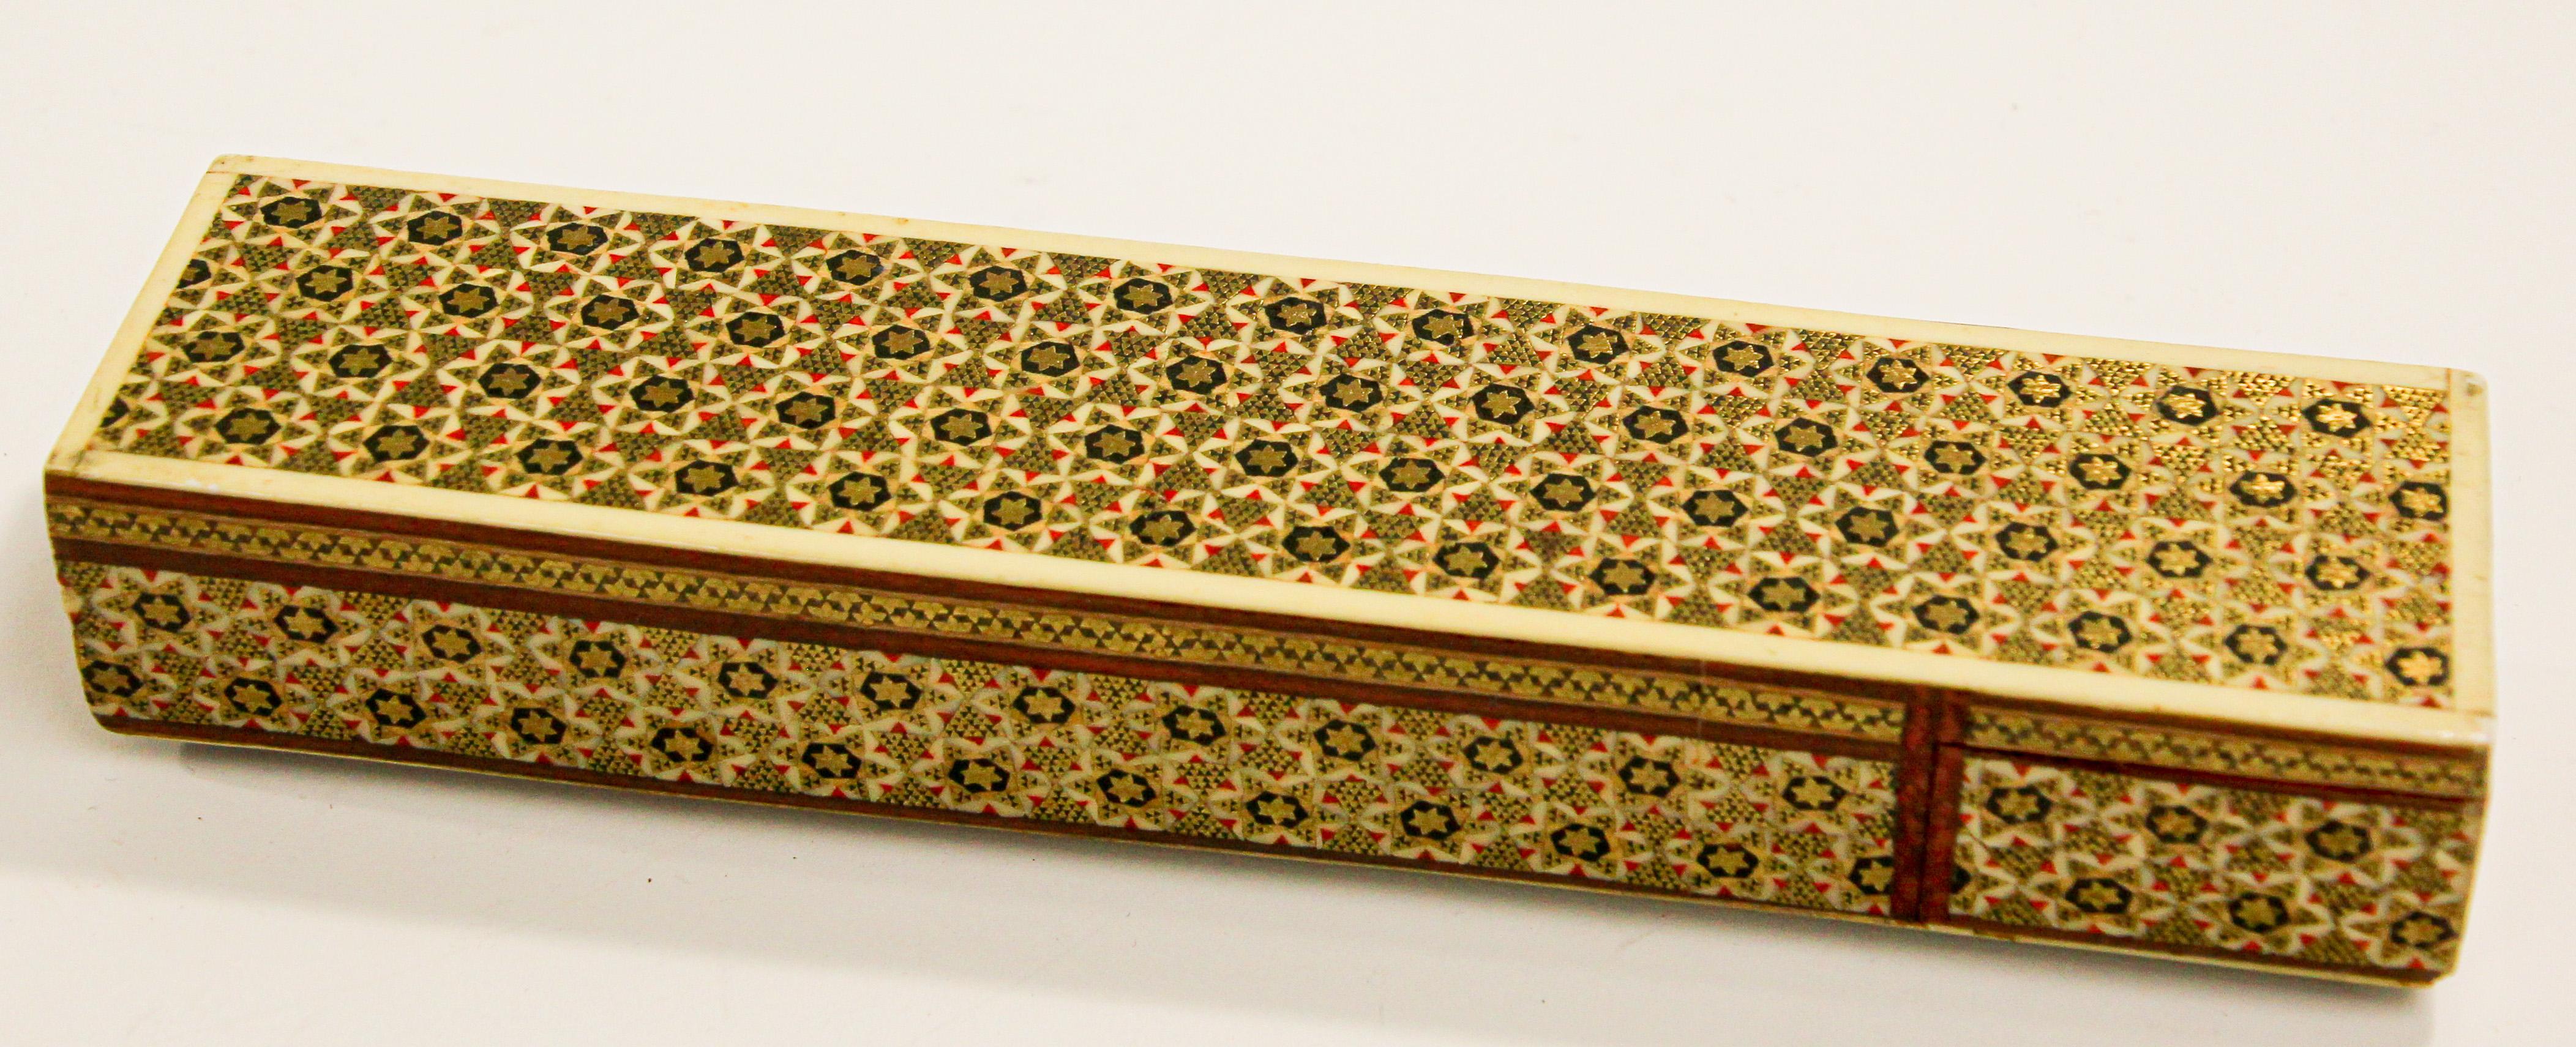 Hand-Painted Persian Lacquer Pen Box Hand Painted with Floral Design